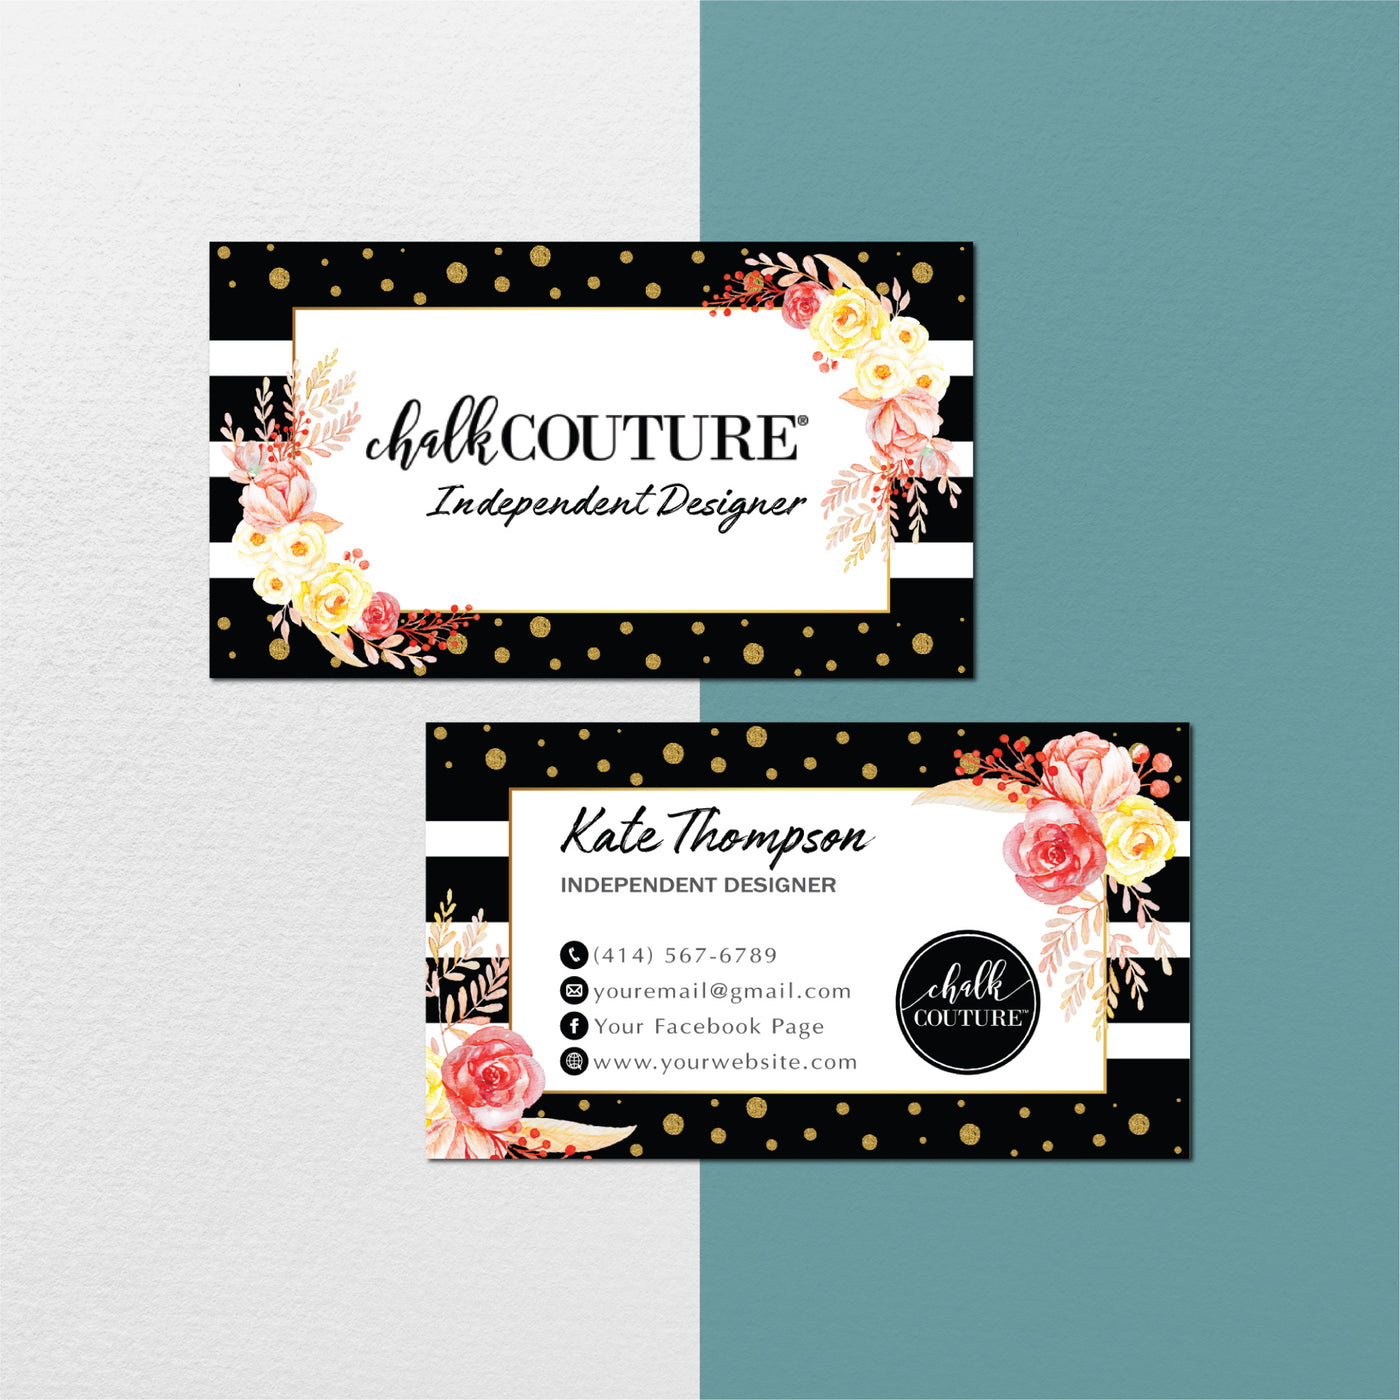 Luxury Chalk Couture Business Card, Personalized Chalk Couture Busines